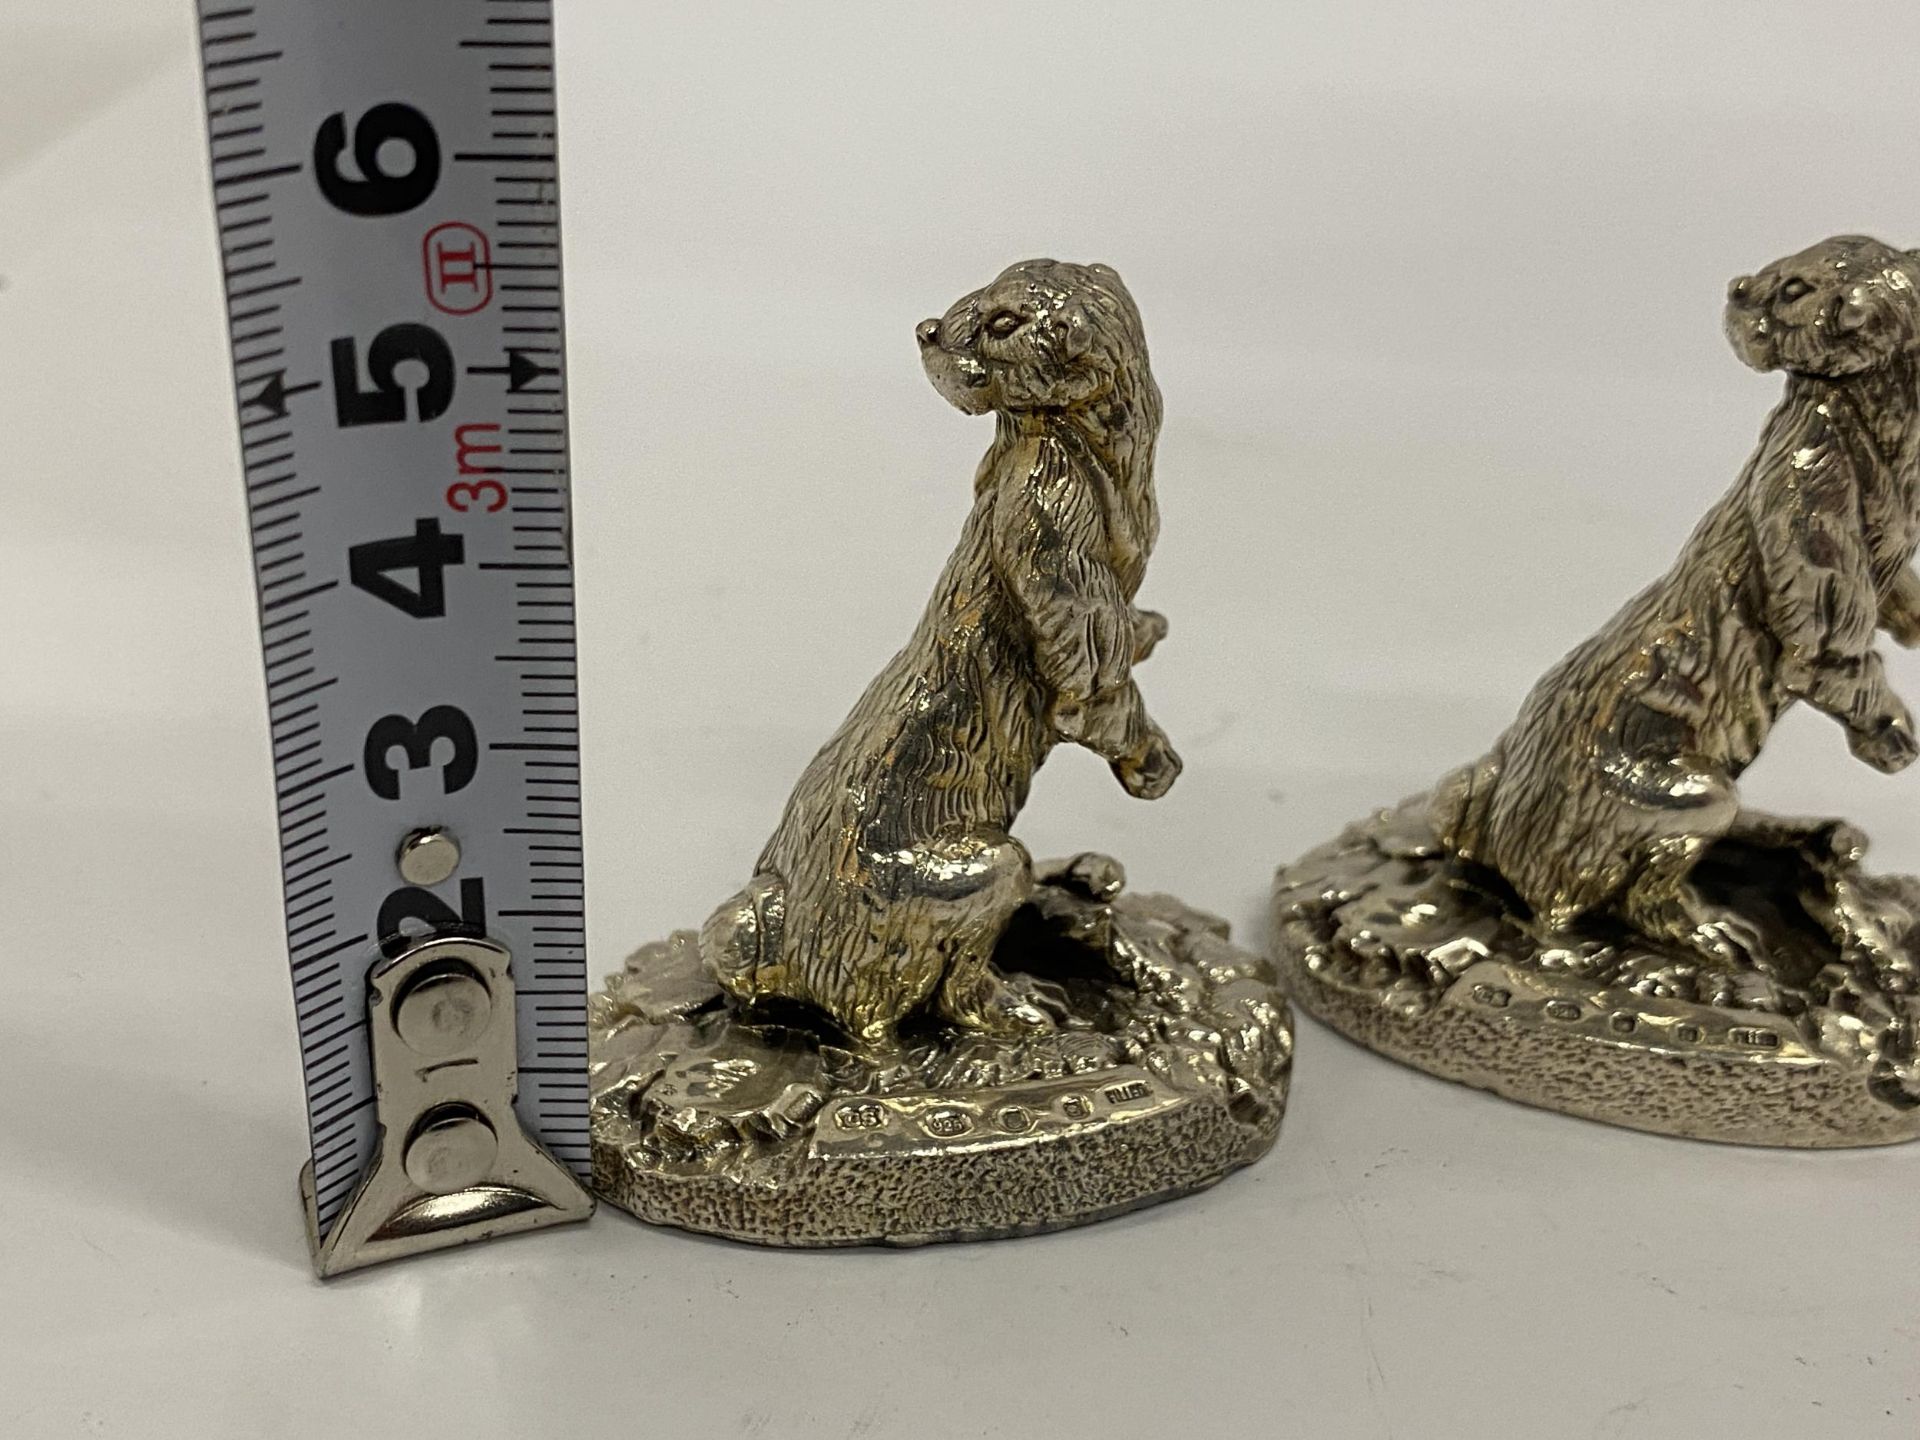 TWO HALLMARKED SILVER FILLED CAMELOT SILVERWARE LTD OTTER FIGURES - Image 3 of 4